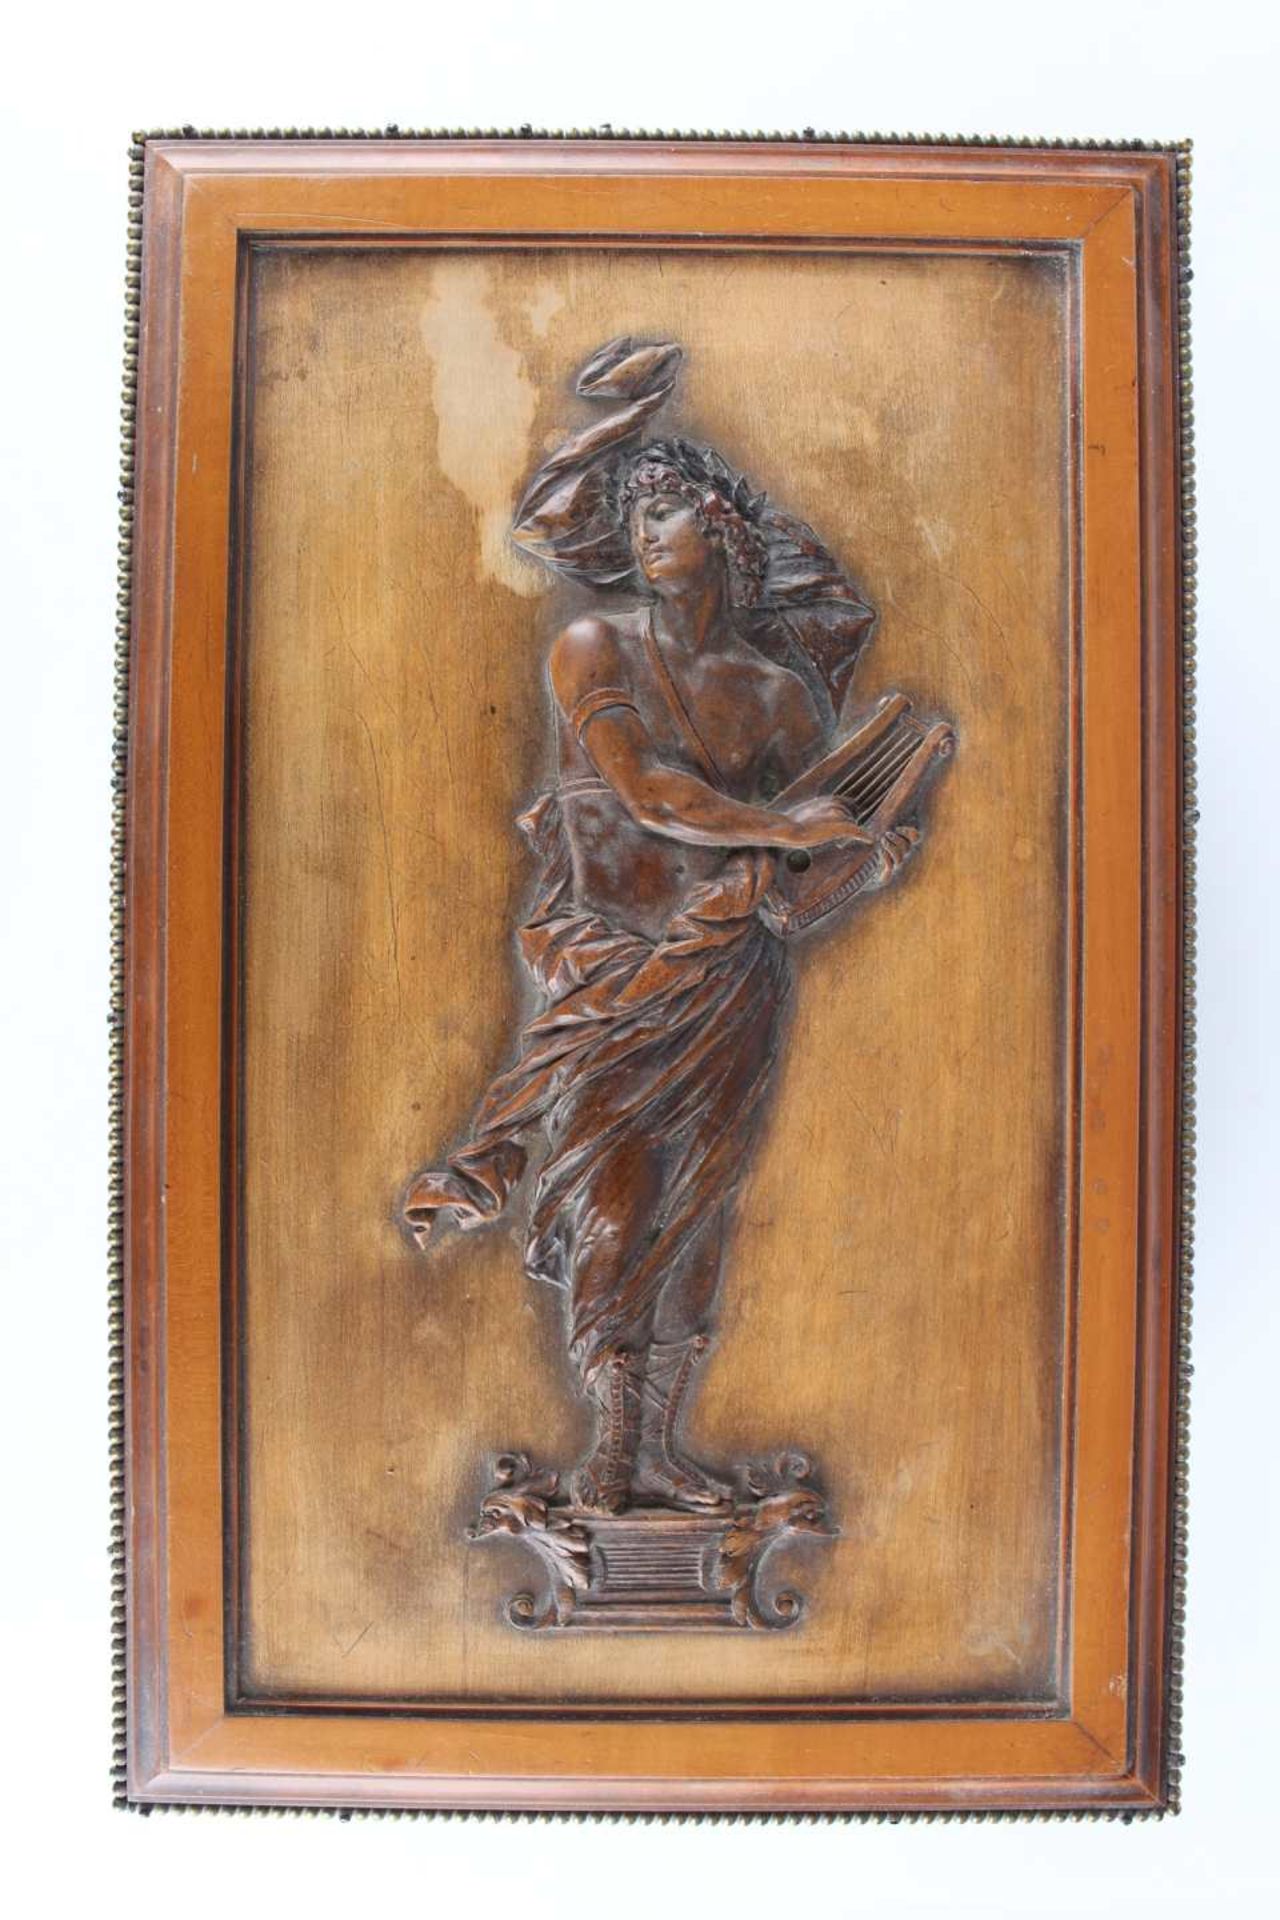 Russische Holztruhe mit Muse Erato, Moskau, russian wooden box with greek muse Erato, - Image 2 of 8